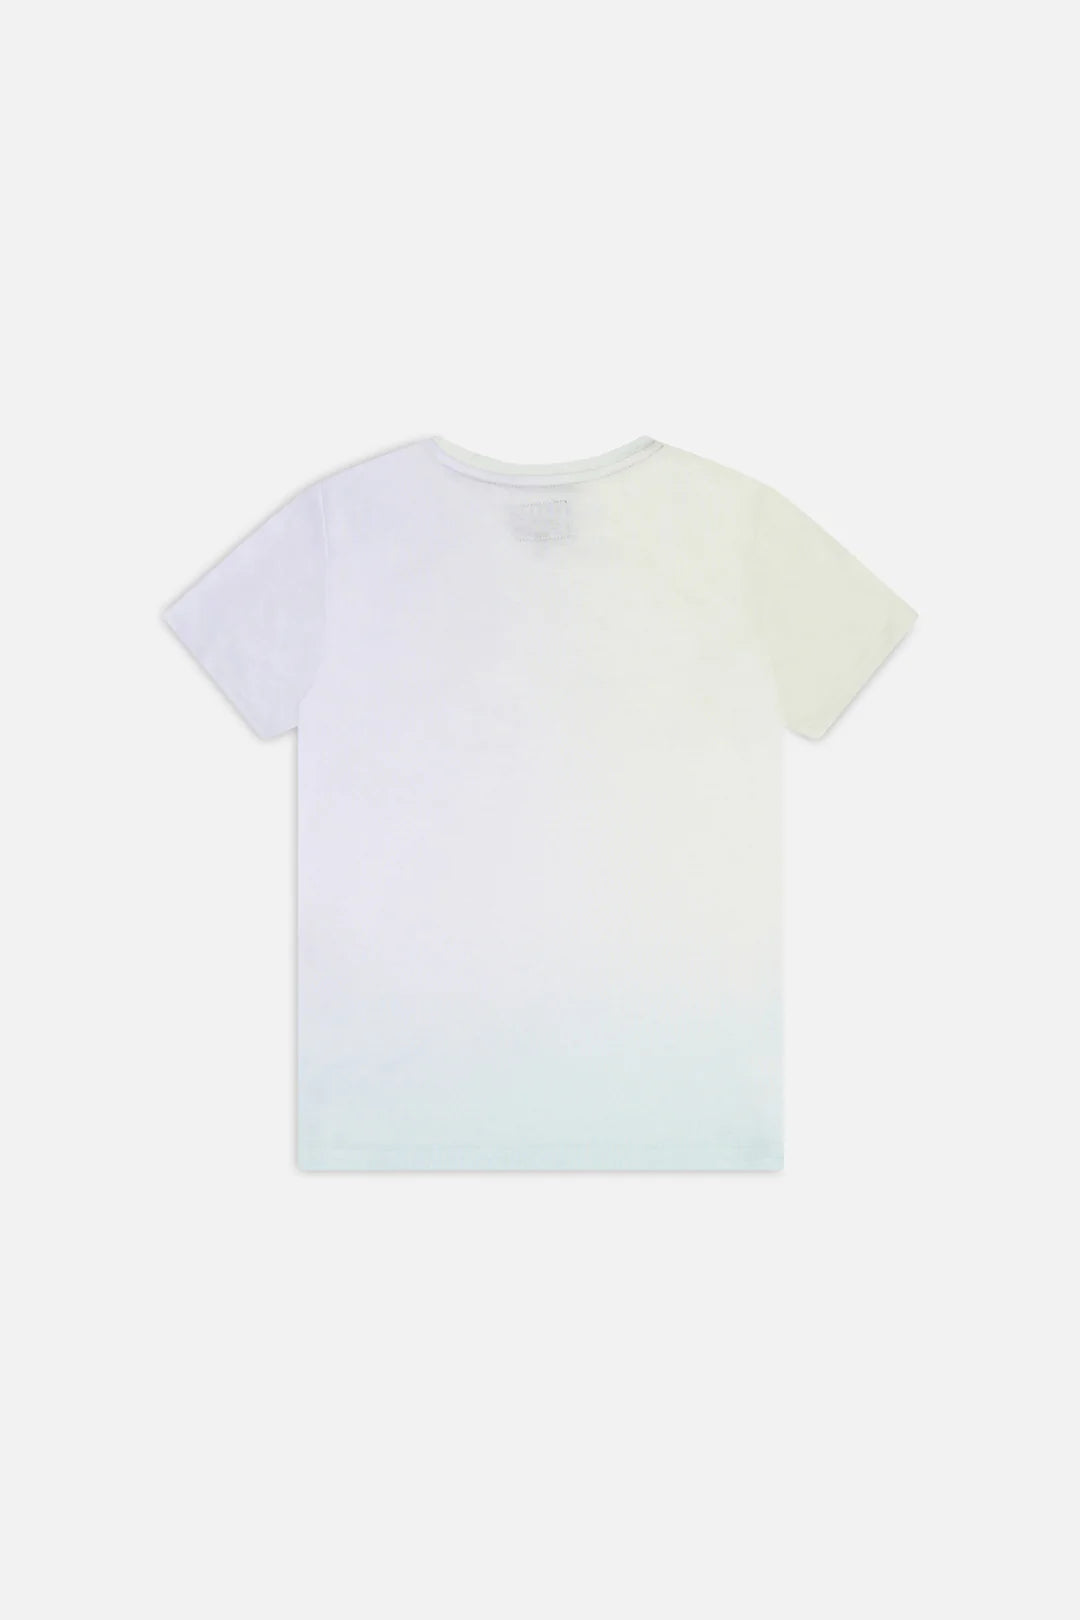 THE ROLER GATESBY TEE - MULTI